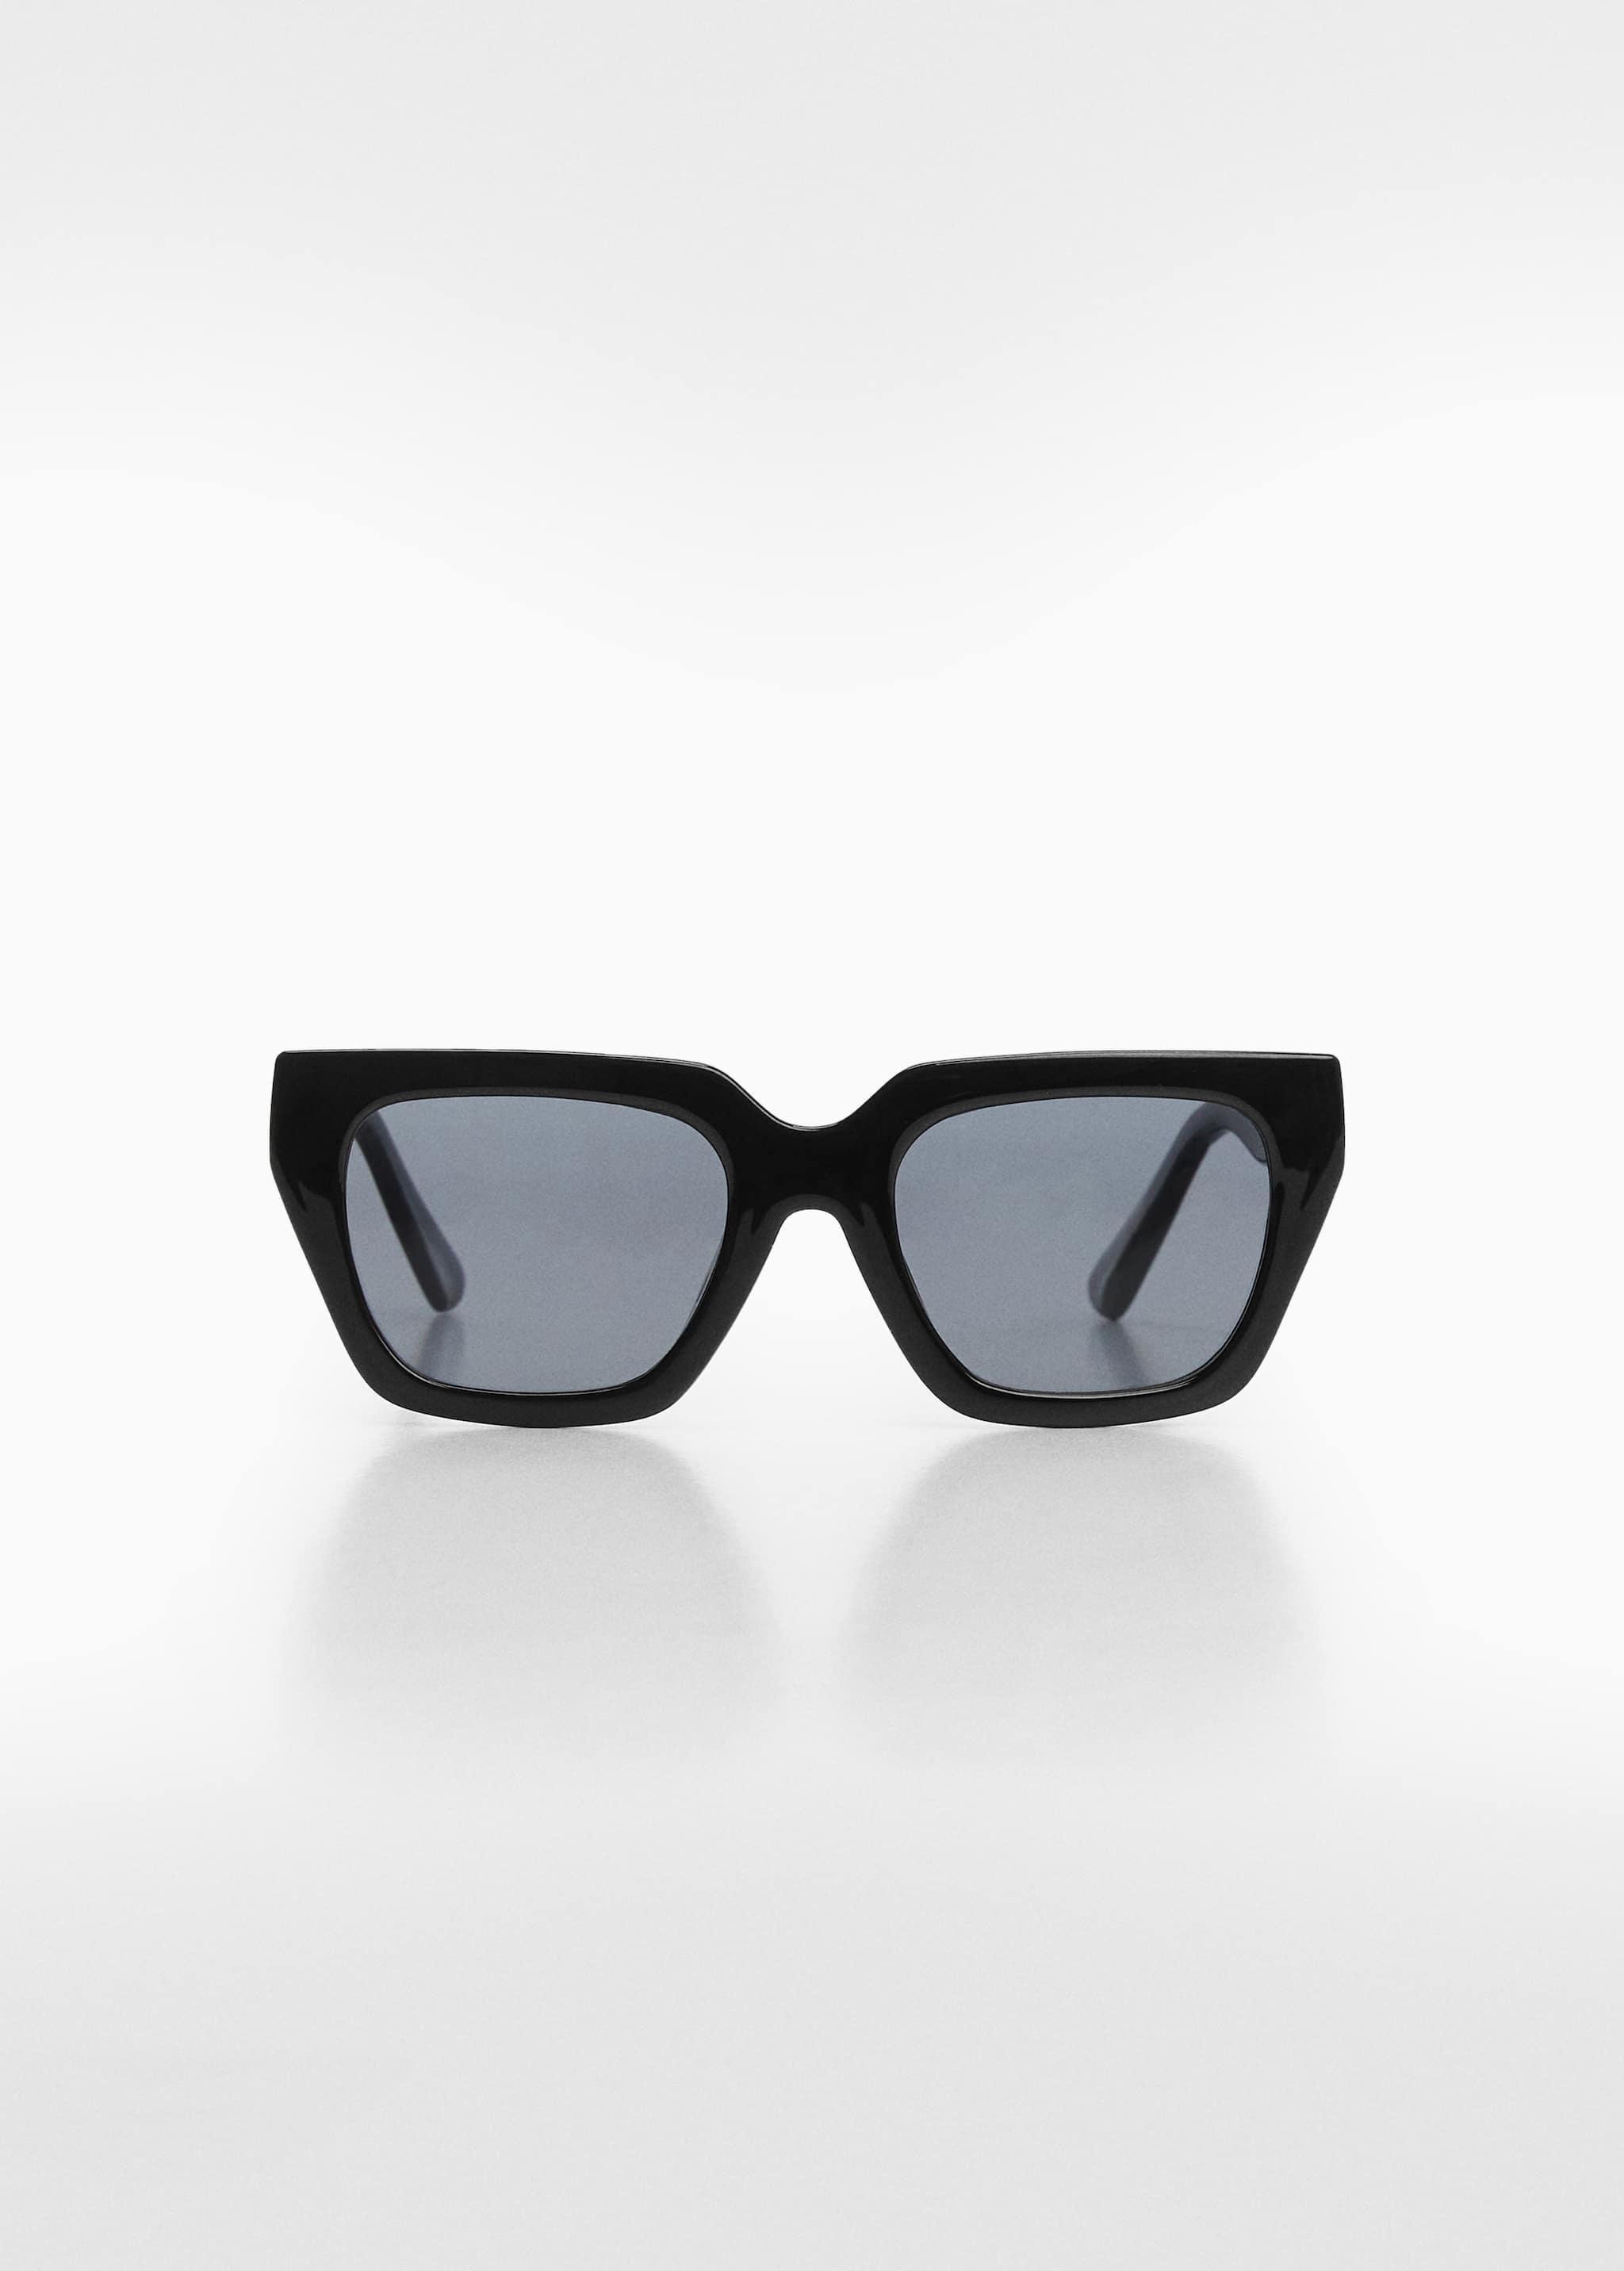 Squared frame sunglasses - Article without model